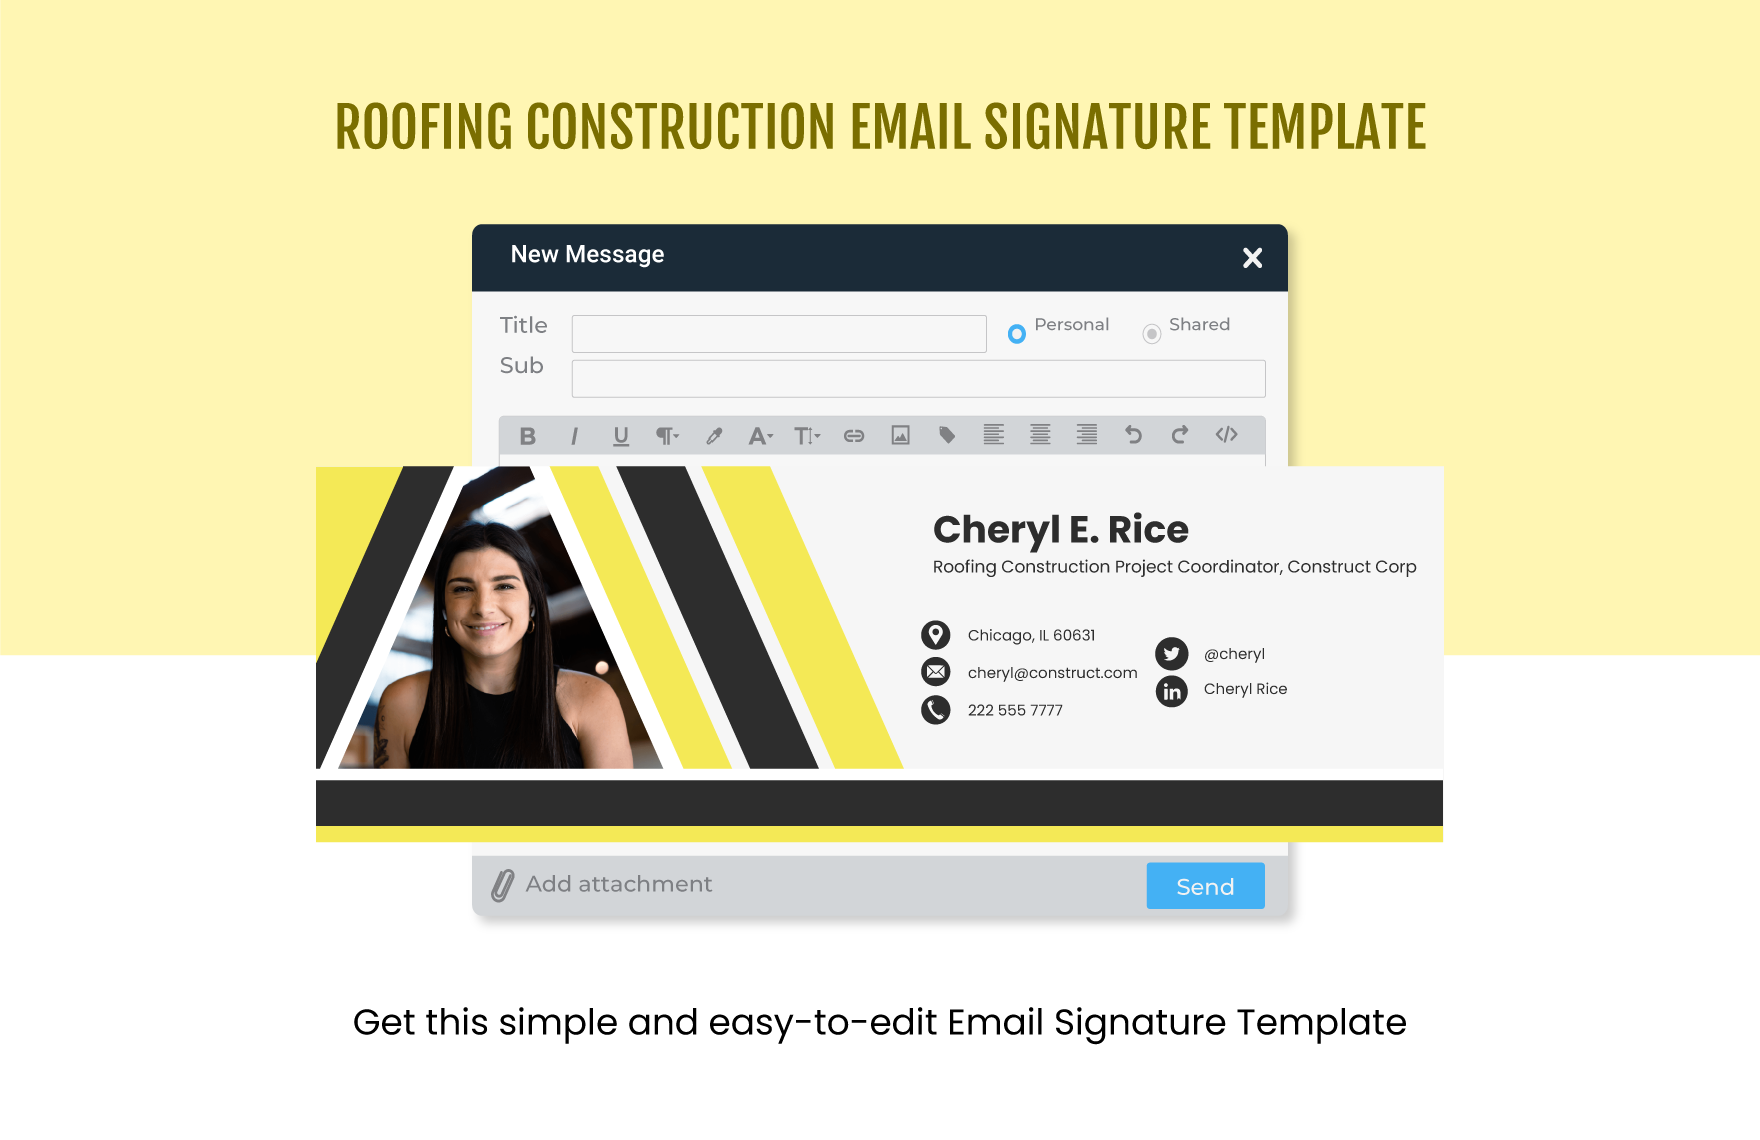 Roofing Construction Email Signature Template